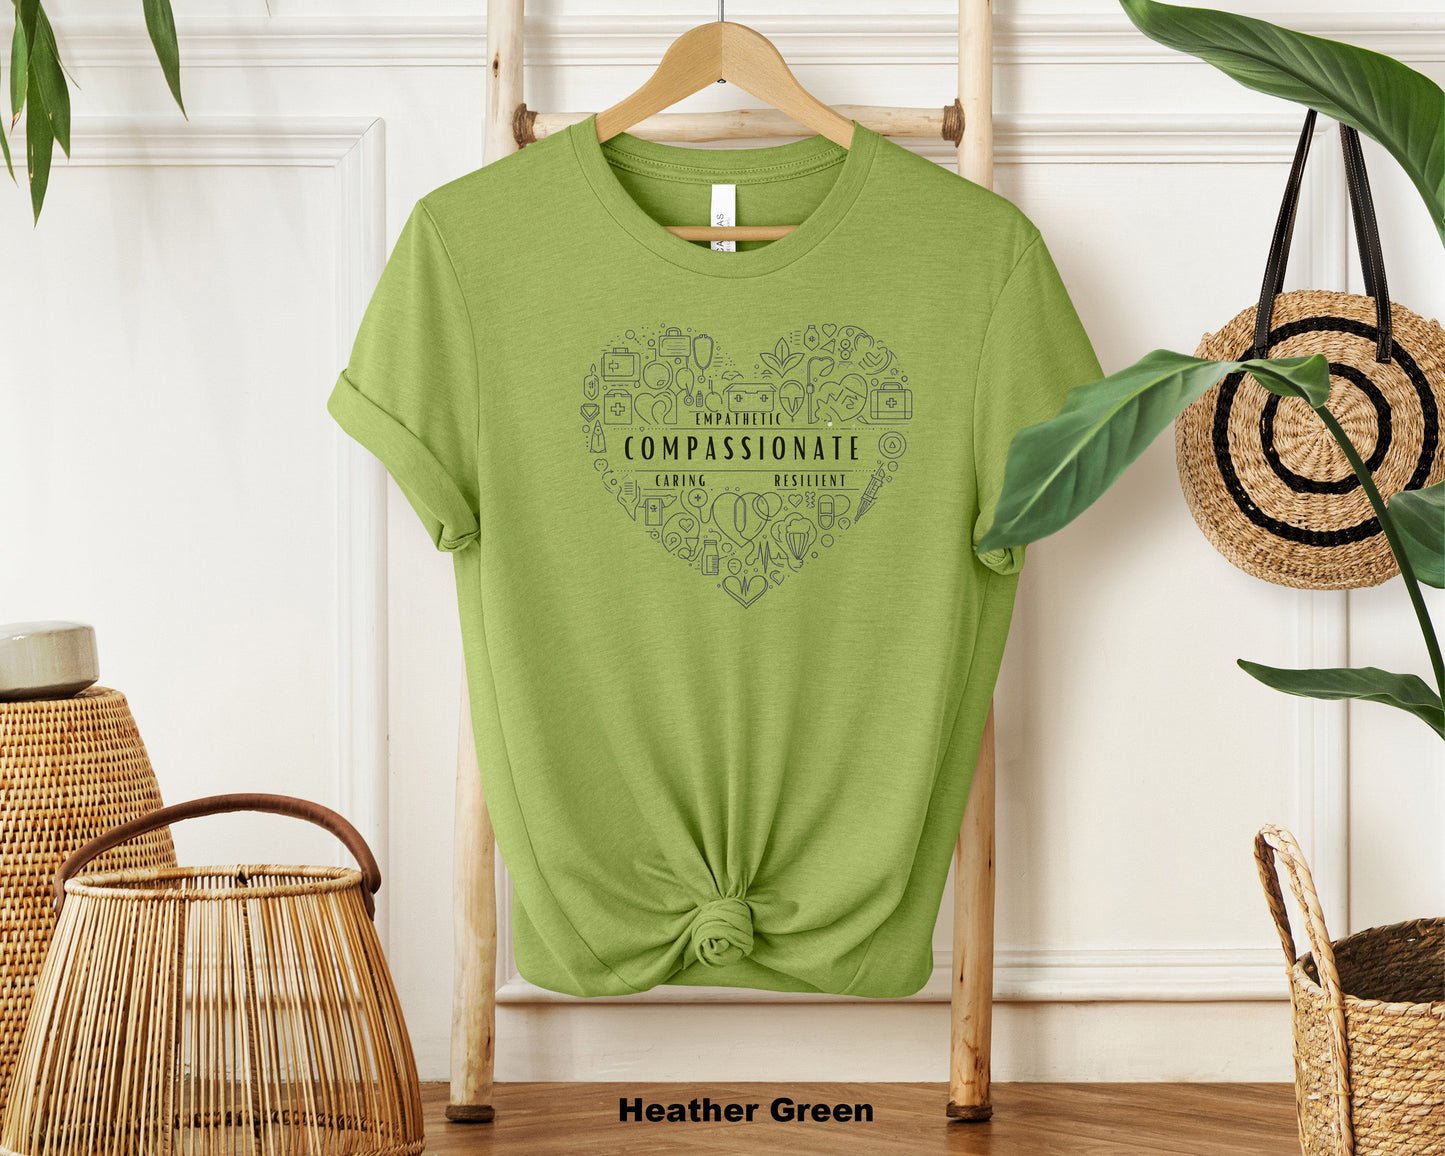 "Heart of Compassion: Classic Unisex Nurse T-Shirt in Soft Cotton with Quality Print"